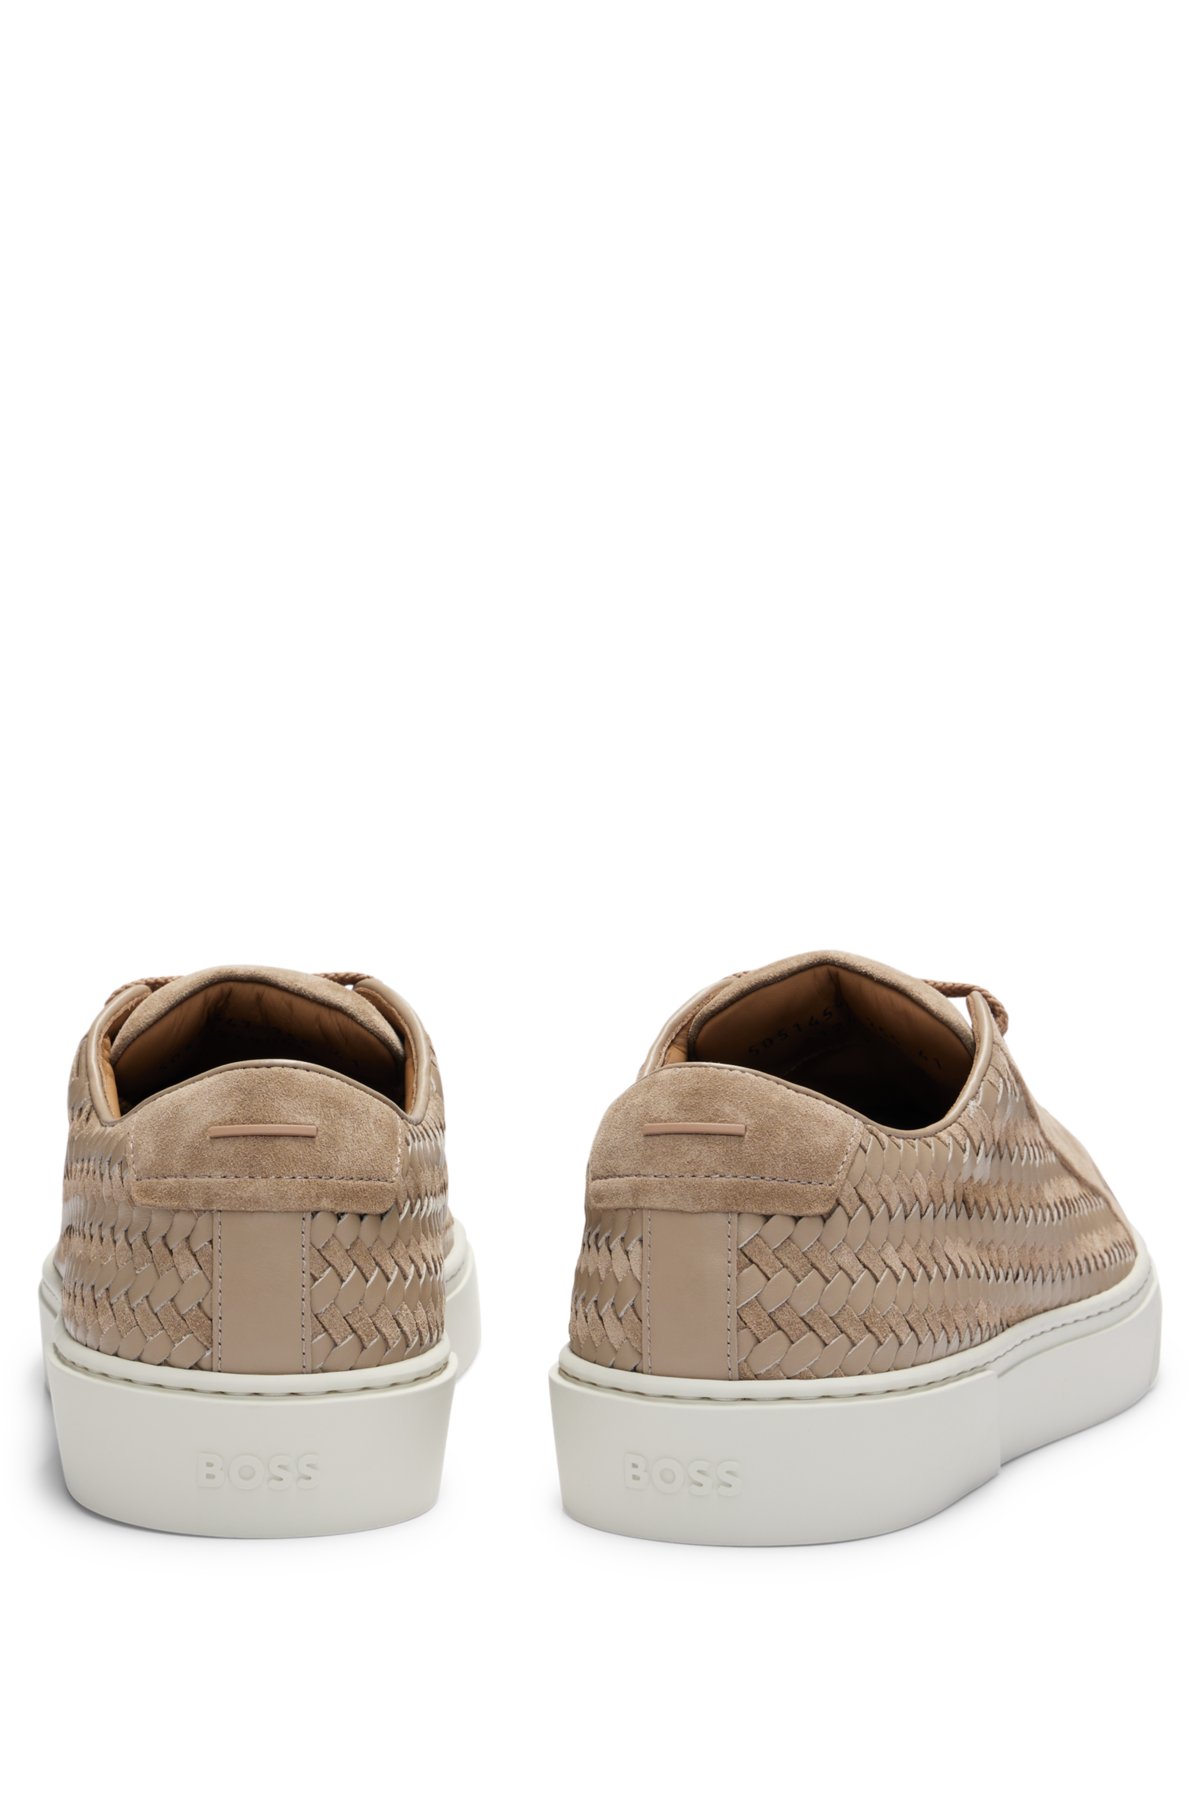 Gary Italian-made woven trainers in leather and suede, Beige